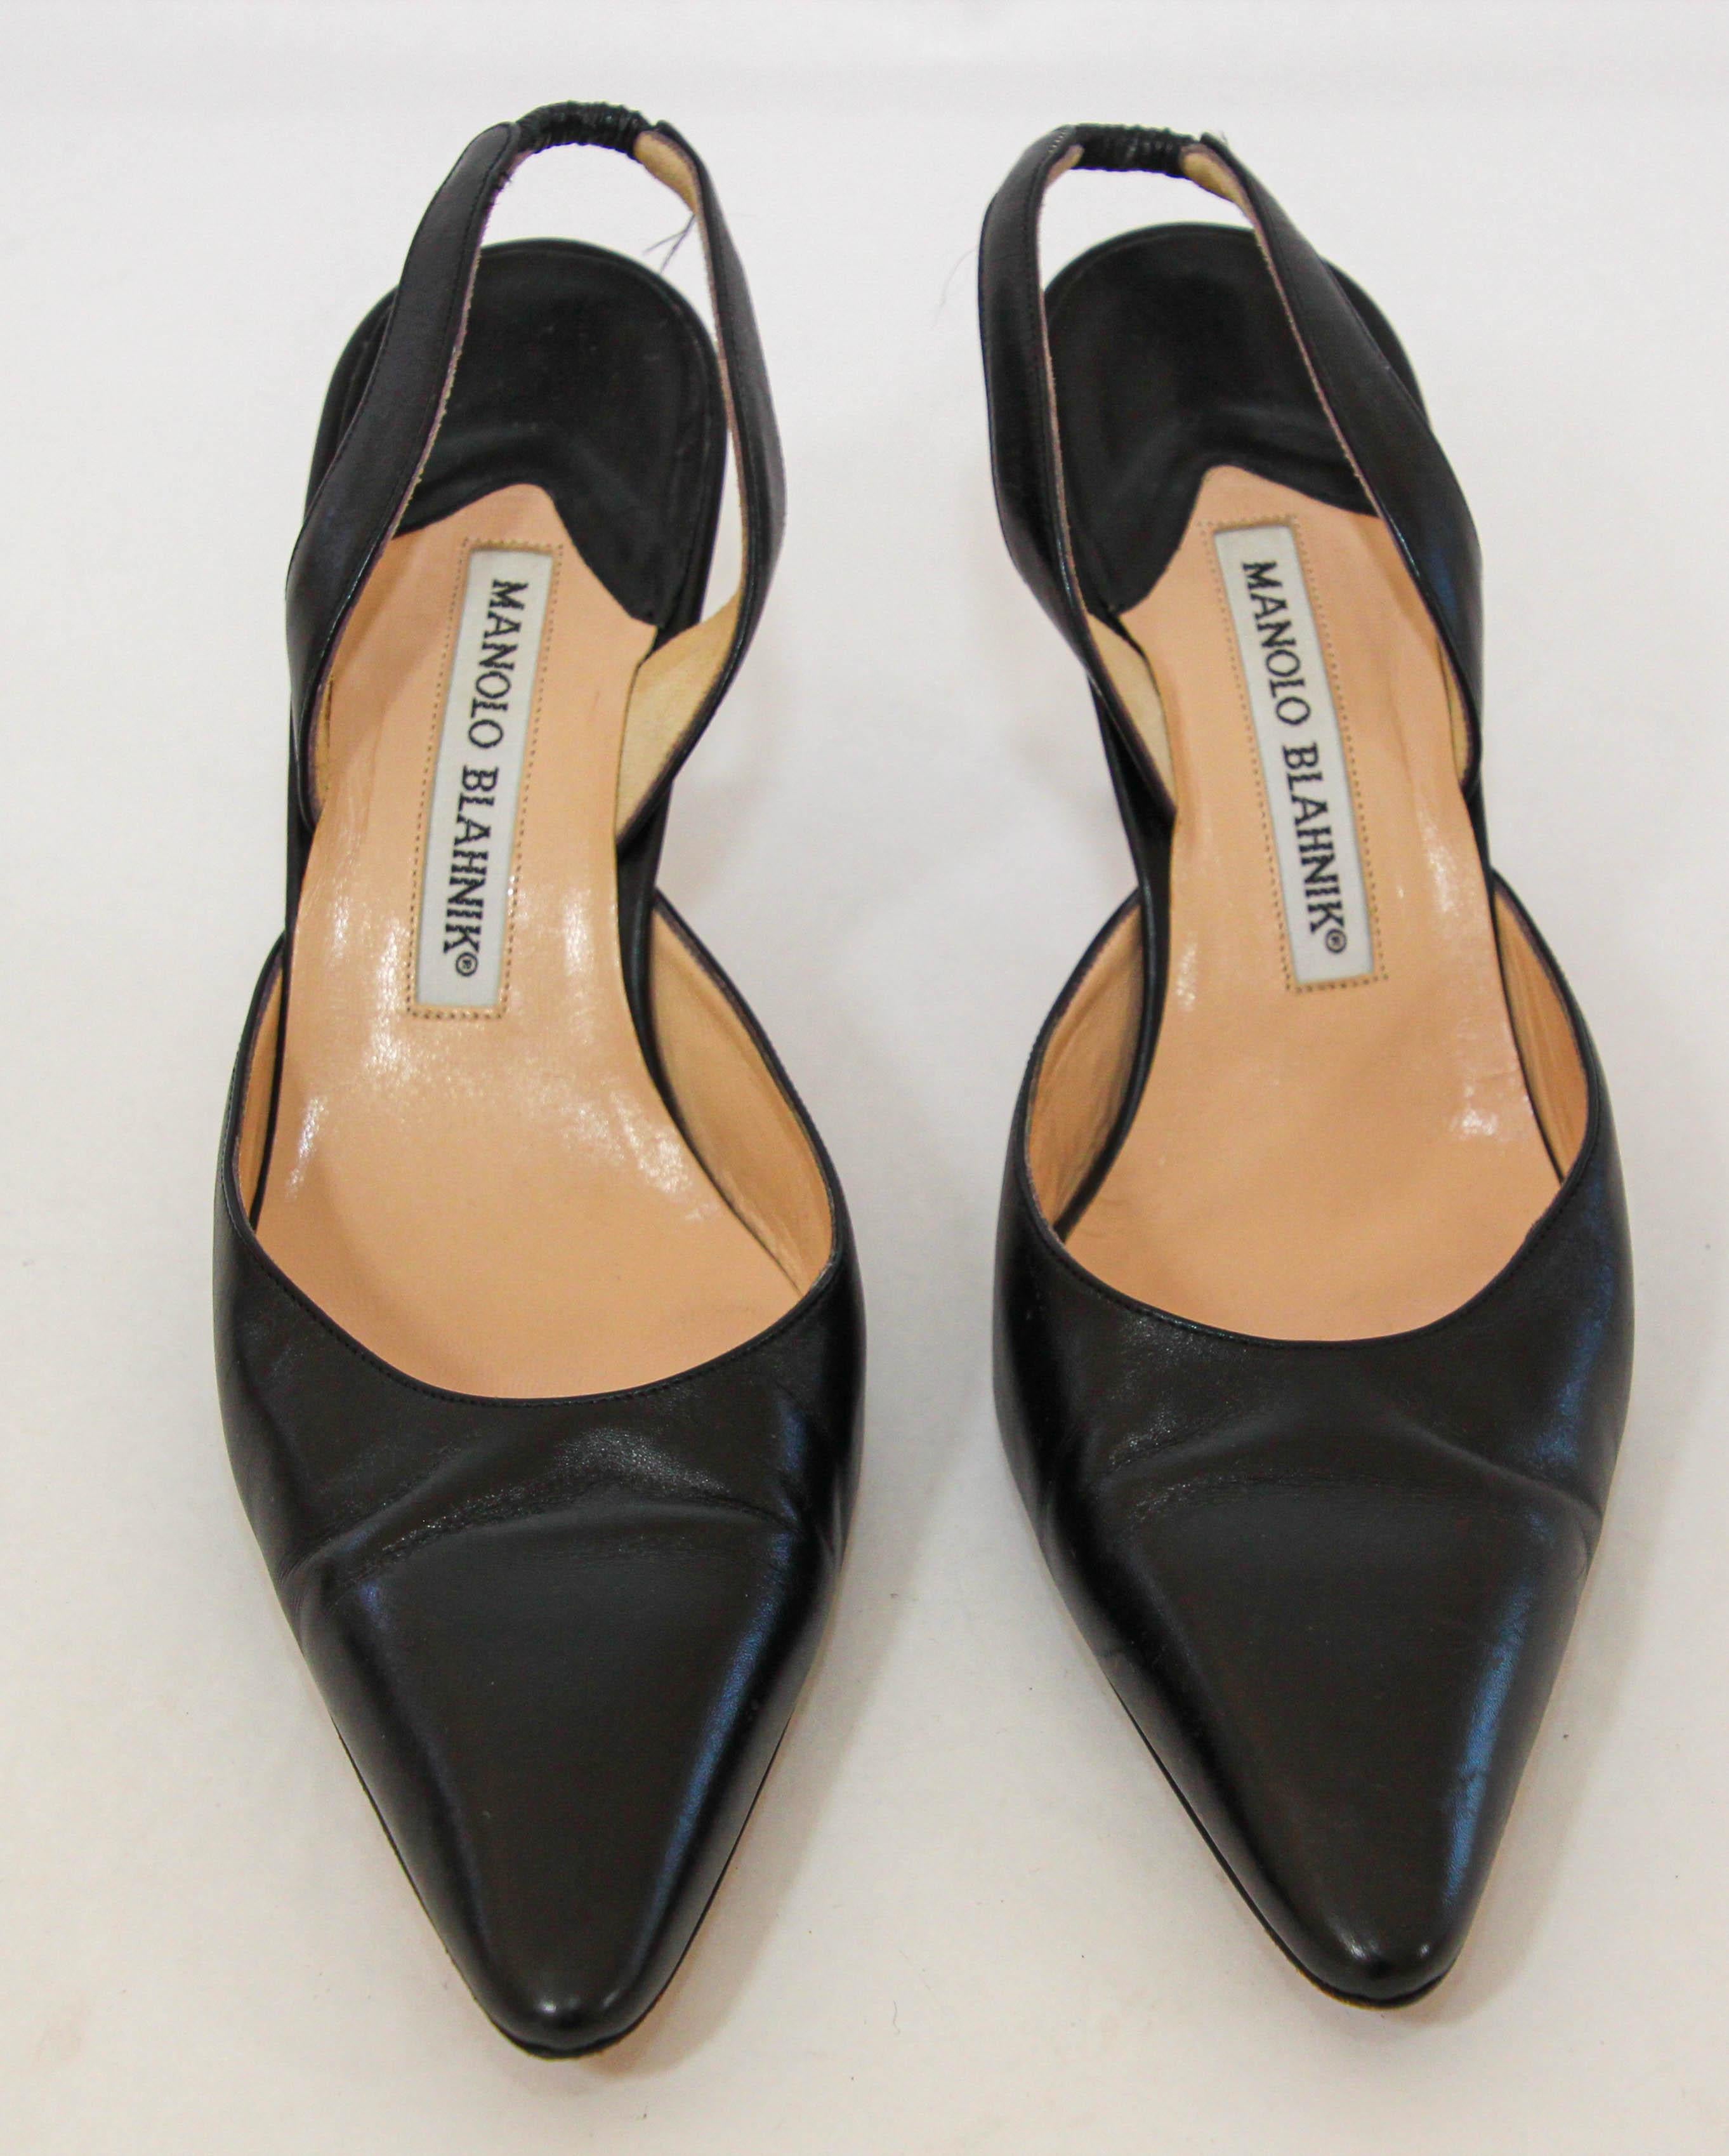 Manolo Blahnik Black Leather Slingback Pumps - Size 37.
These timeless Manolo Blahnik pointed toe leather slingbacks were hand made in Italy.
The back of the slingback is elastic for easy entry. 
These Manolo Blahnik pumps exudes an undeniably